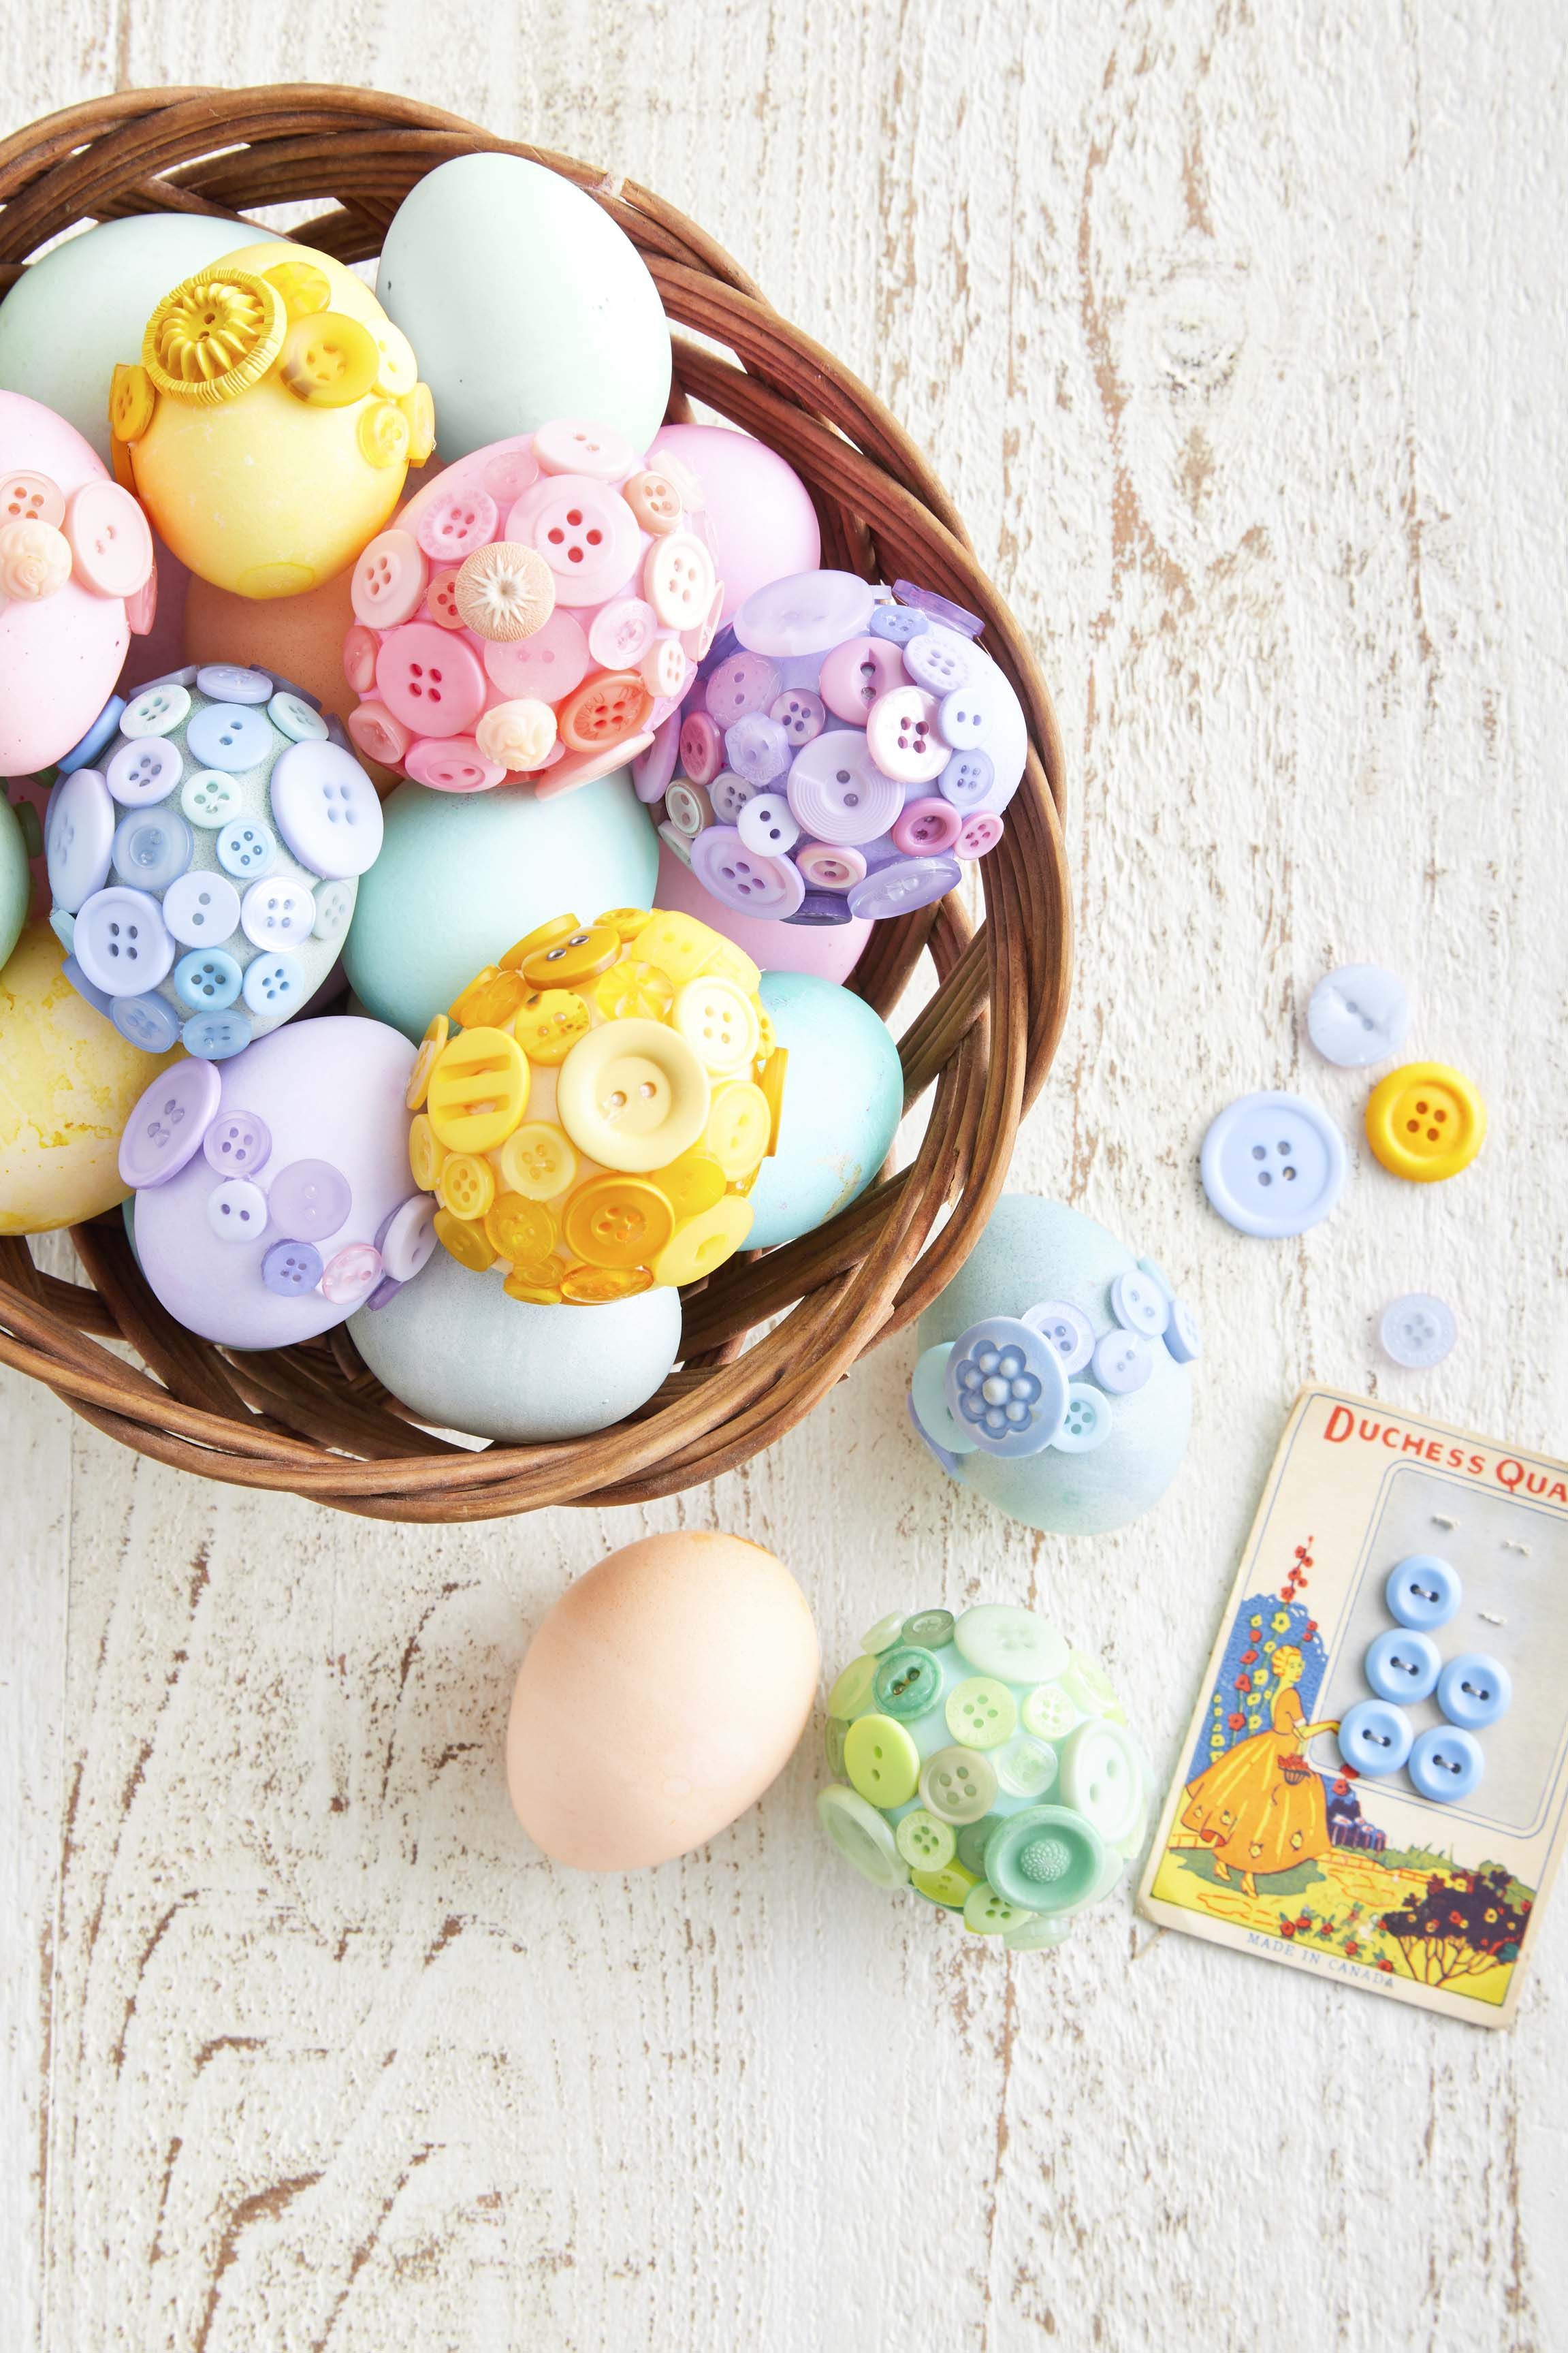 60 Best Easter Egg Designs & Decorations - Simple, Cute Ideas